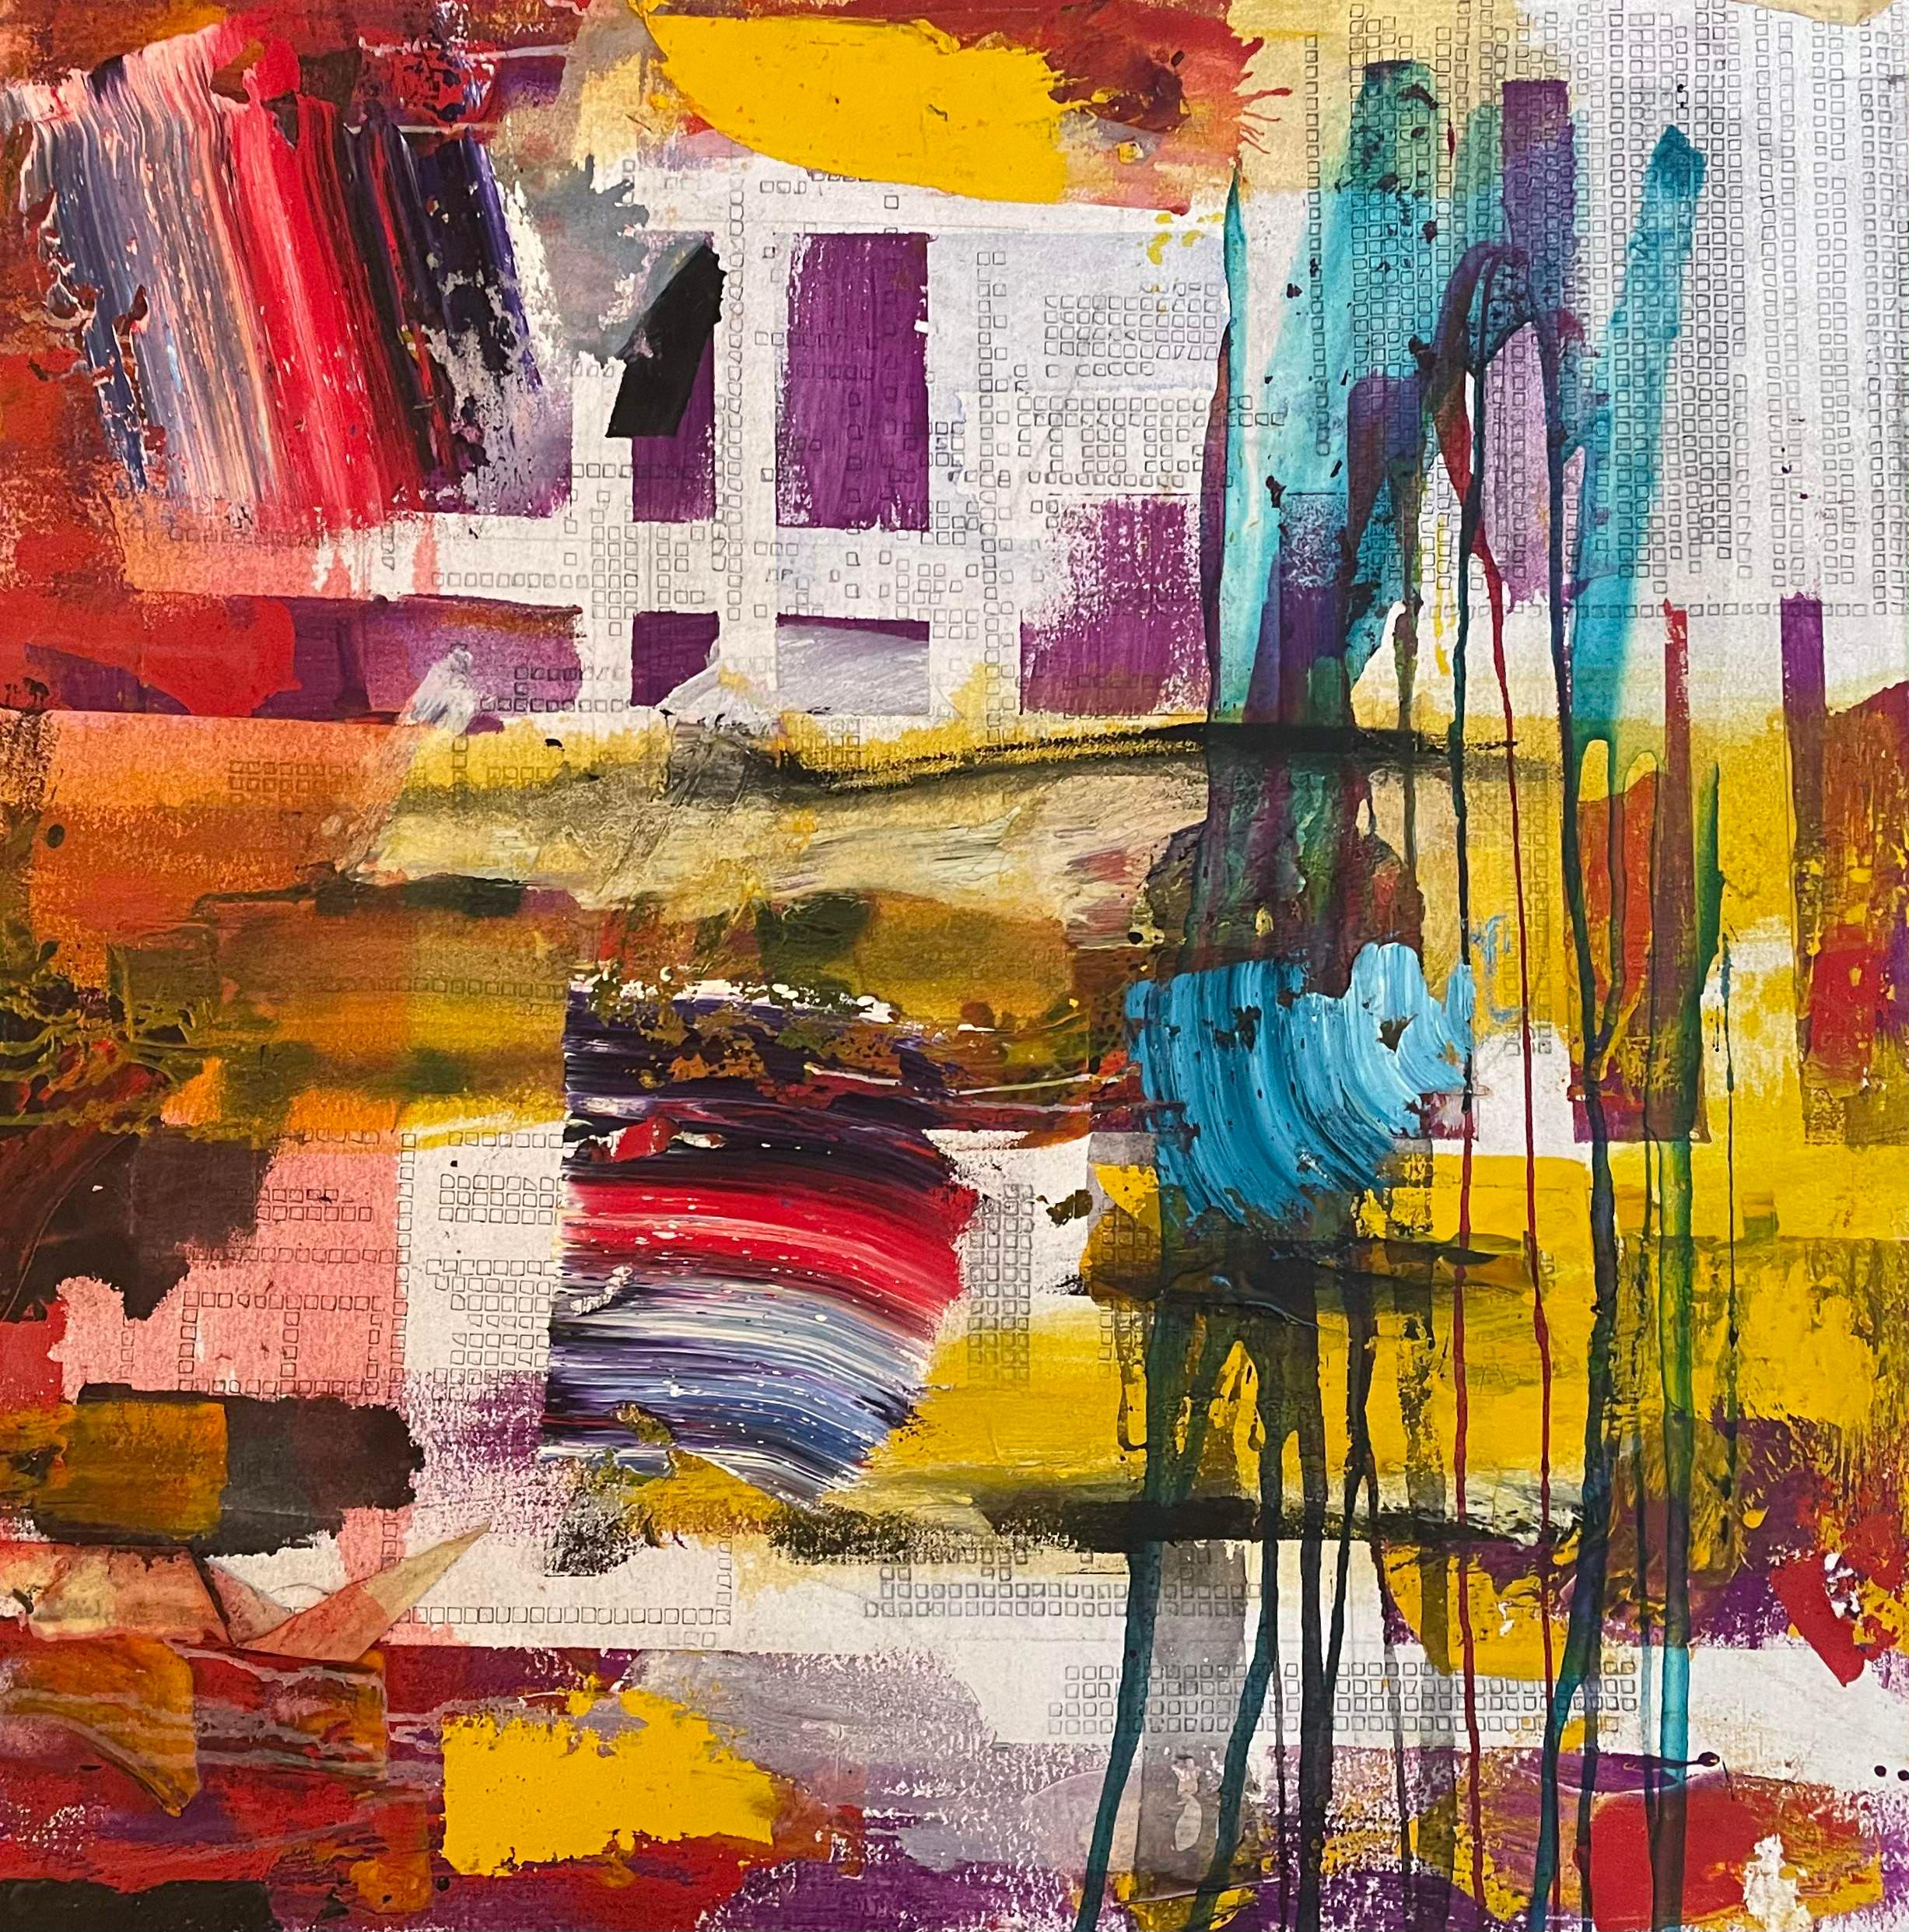 Steven Rehfeld's 30" x 30" abstract mixed media creation emanates a passionate intensity. Vibrant swaths of color, ranging from fiery reds and cool blues to rich golds, intermingle and clash with kinetic energy. Streaks of paint cascade like rain